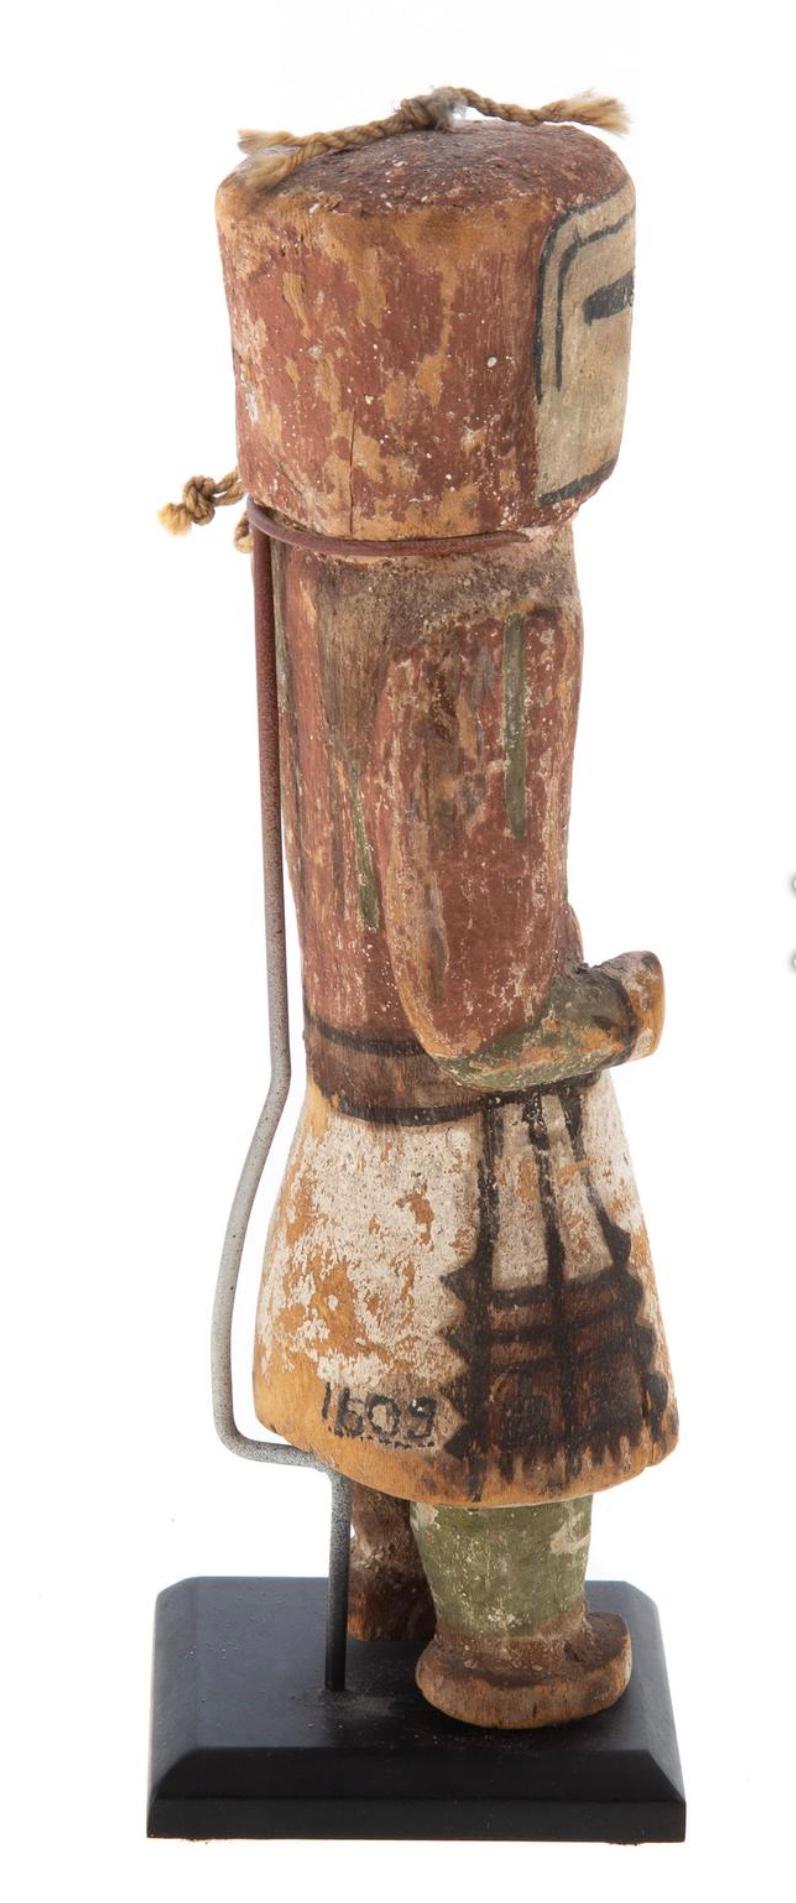 19th Century Hopi carved Kachina doll.
Circa 1900: cottonwood with earthen pigments, 7 3/8 in. H., with a stand. Collection inventory number on back of skirt.